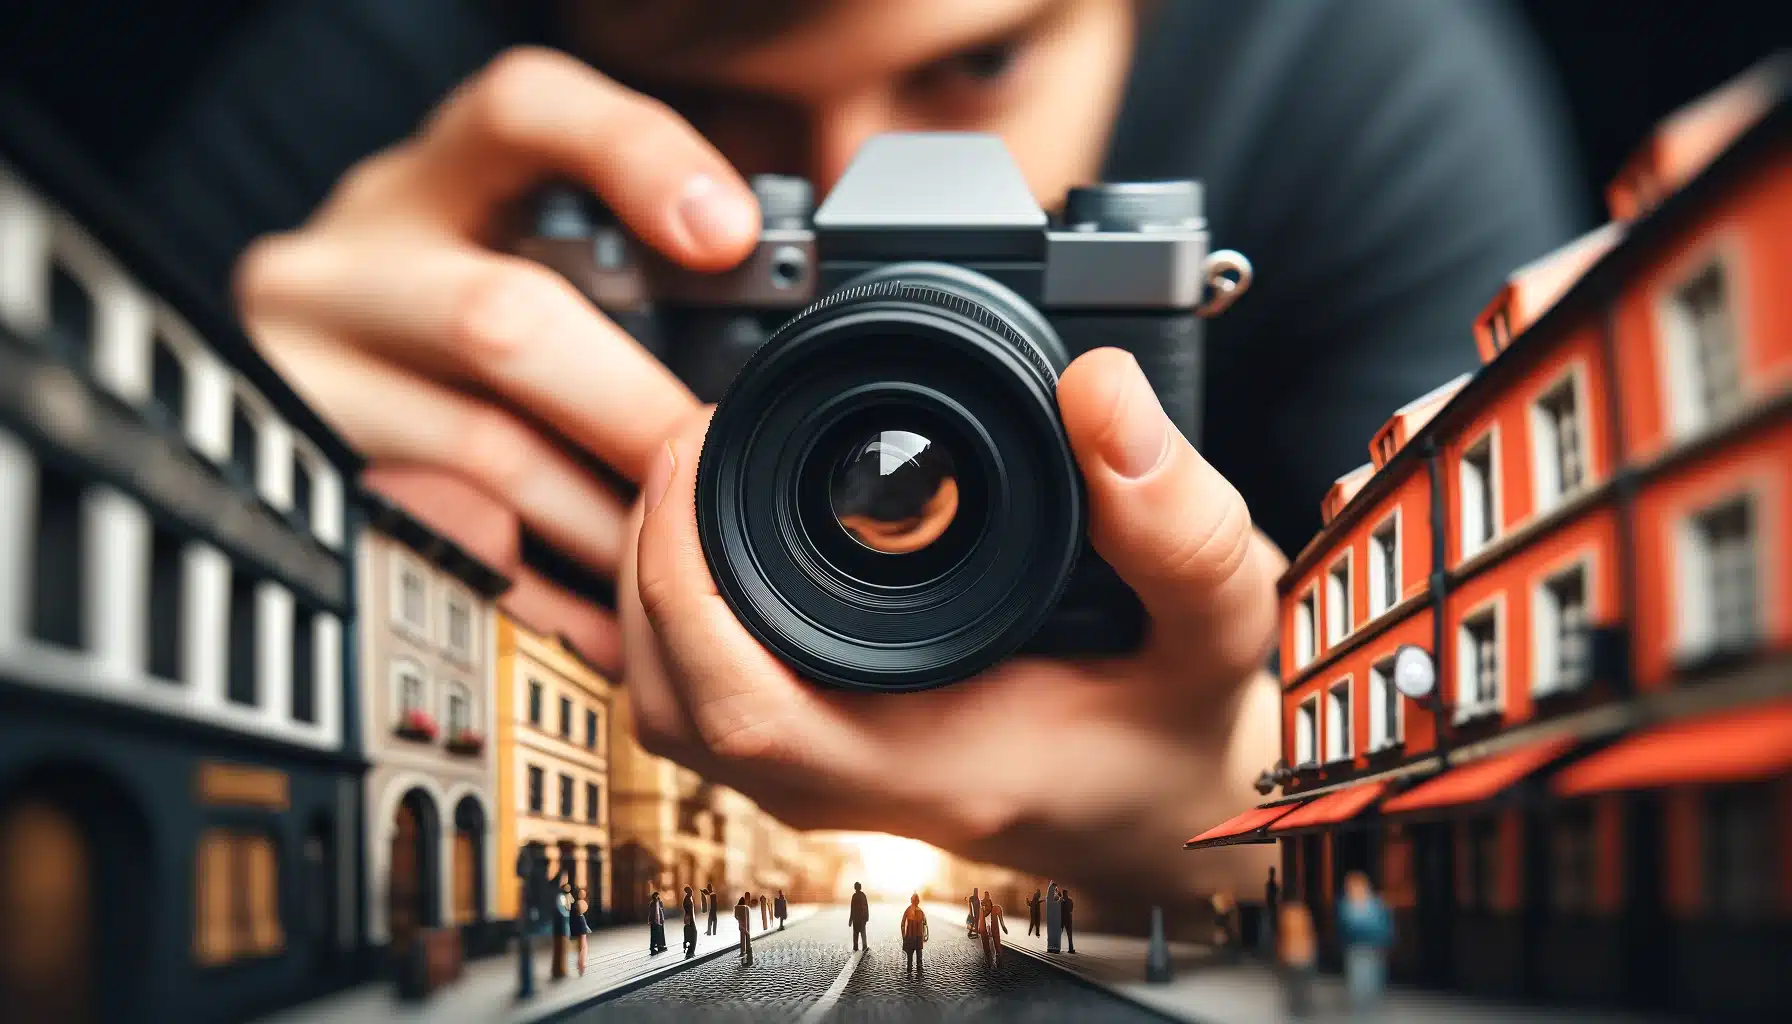 Person using a tilt-shift lens on a camera in an urban or architectural setting